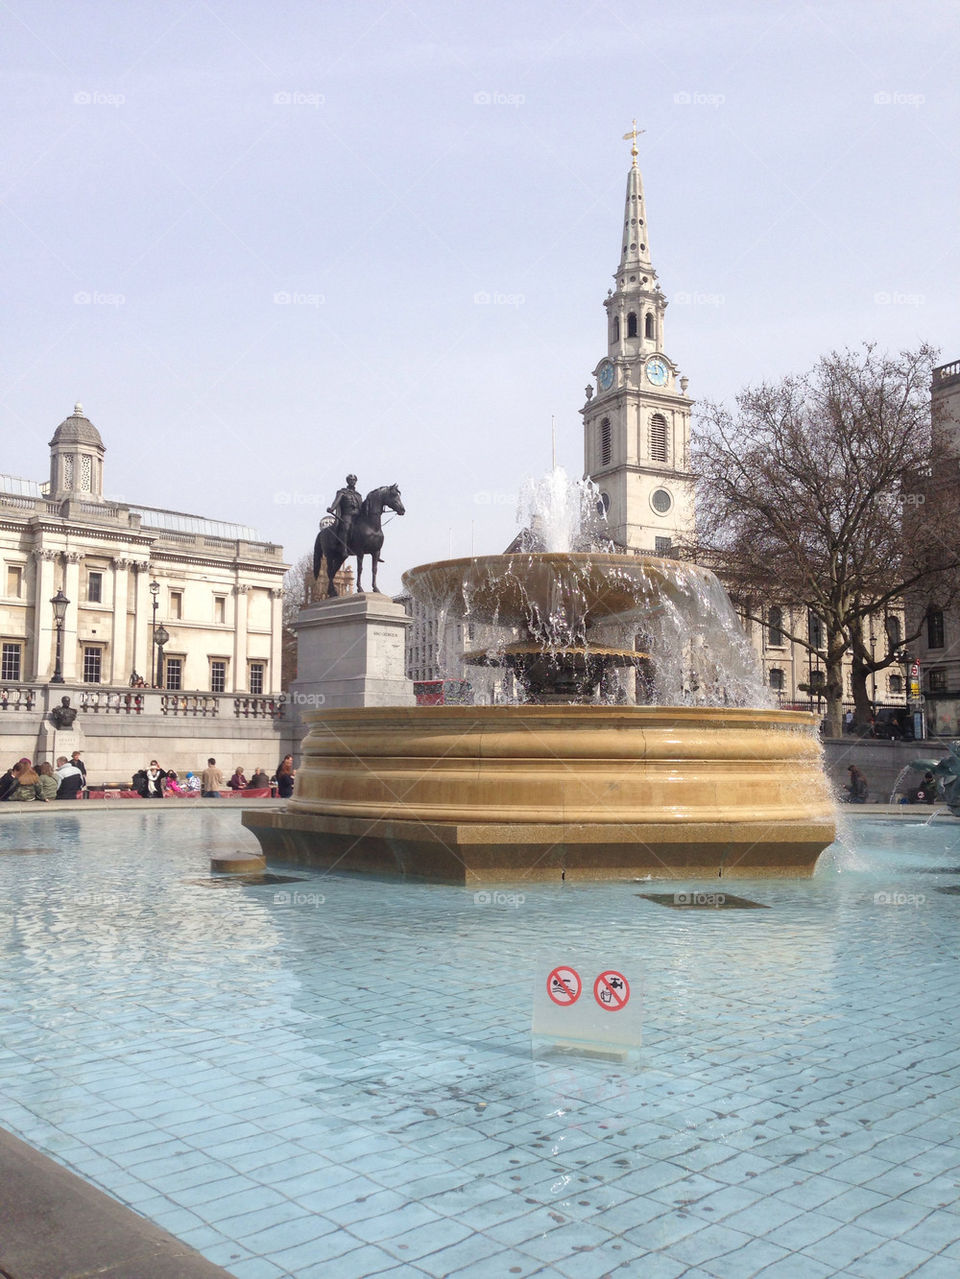 The fountains at the foot of nelson's column, looking towards the